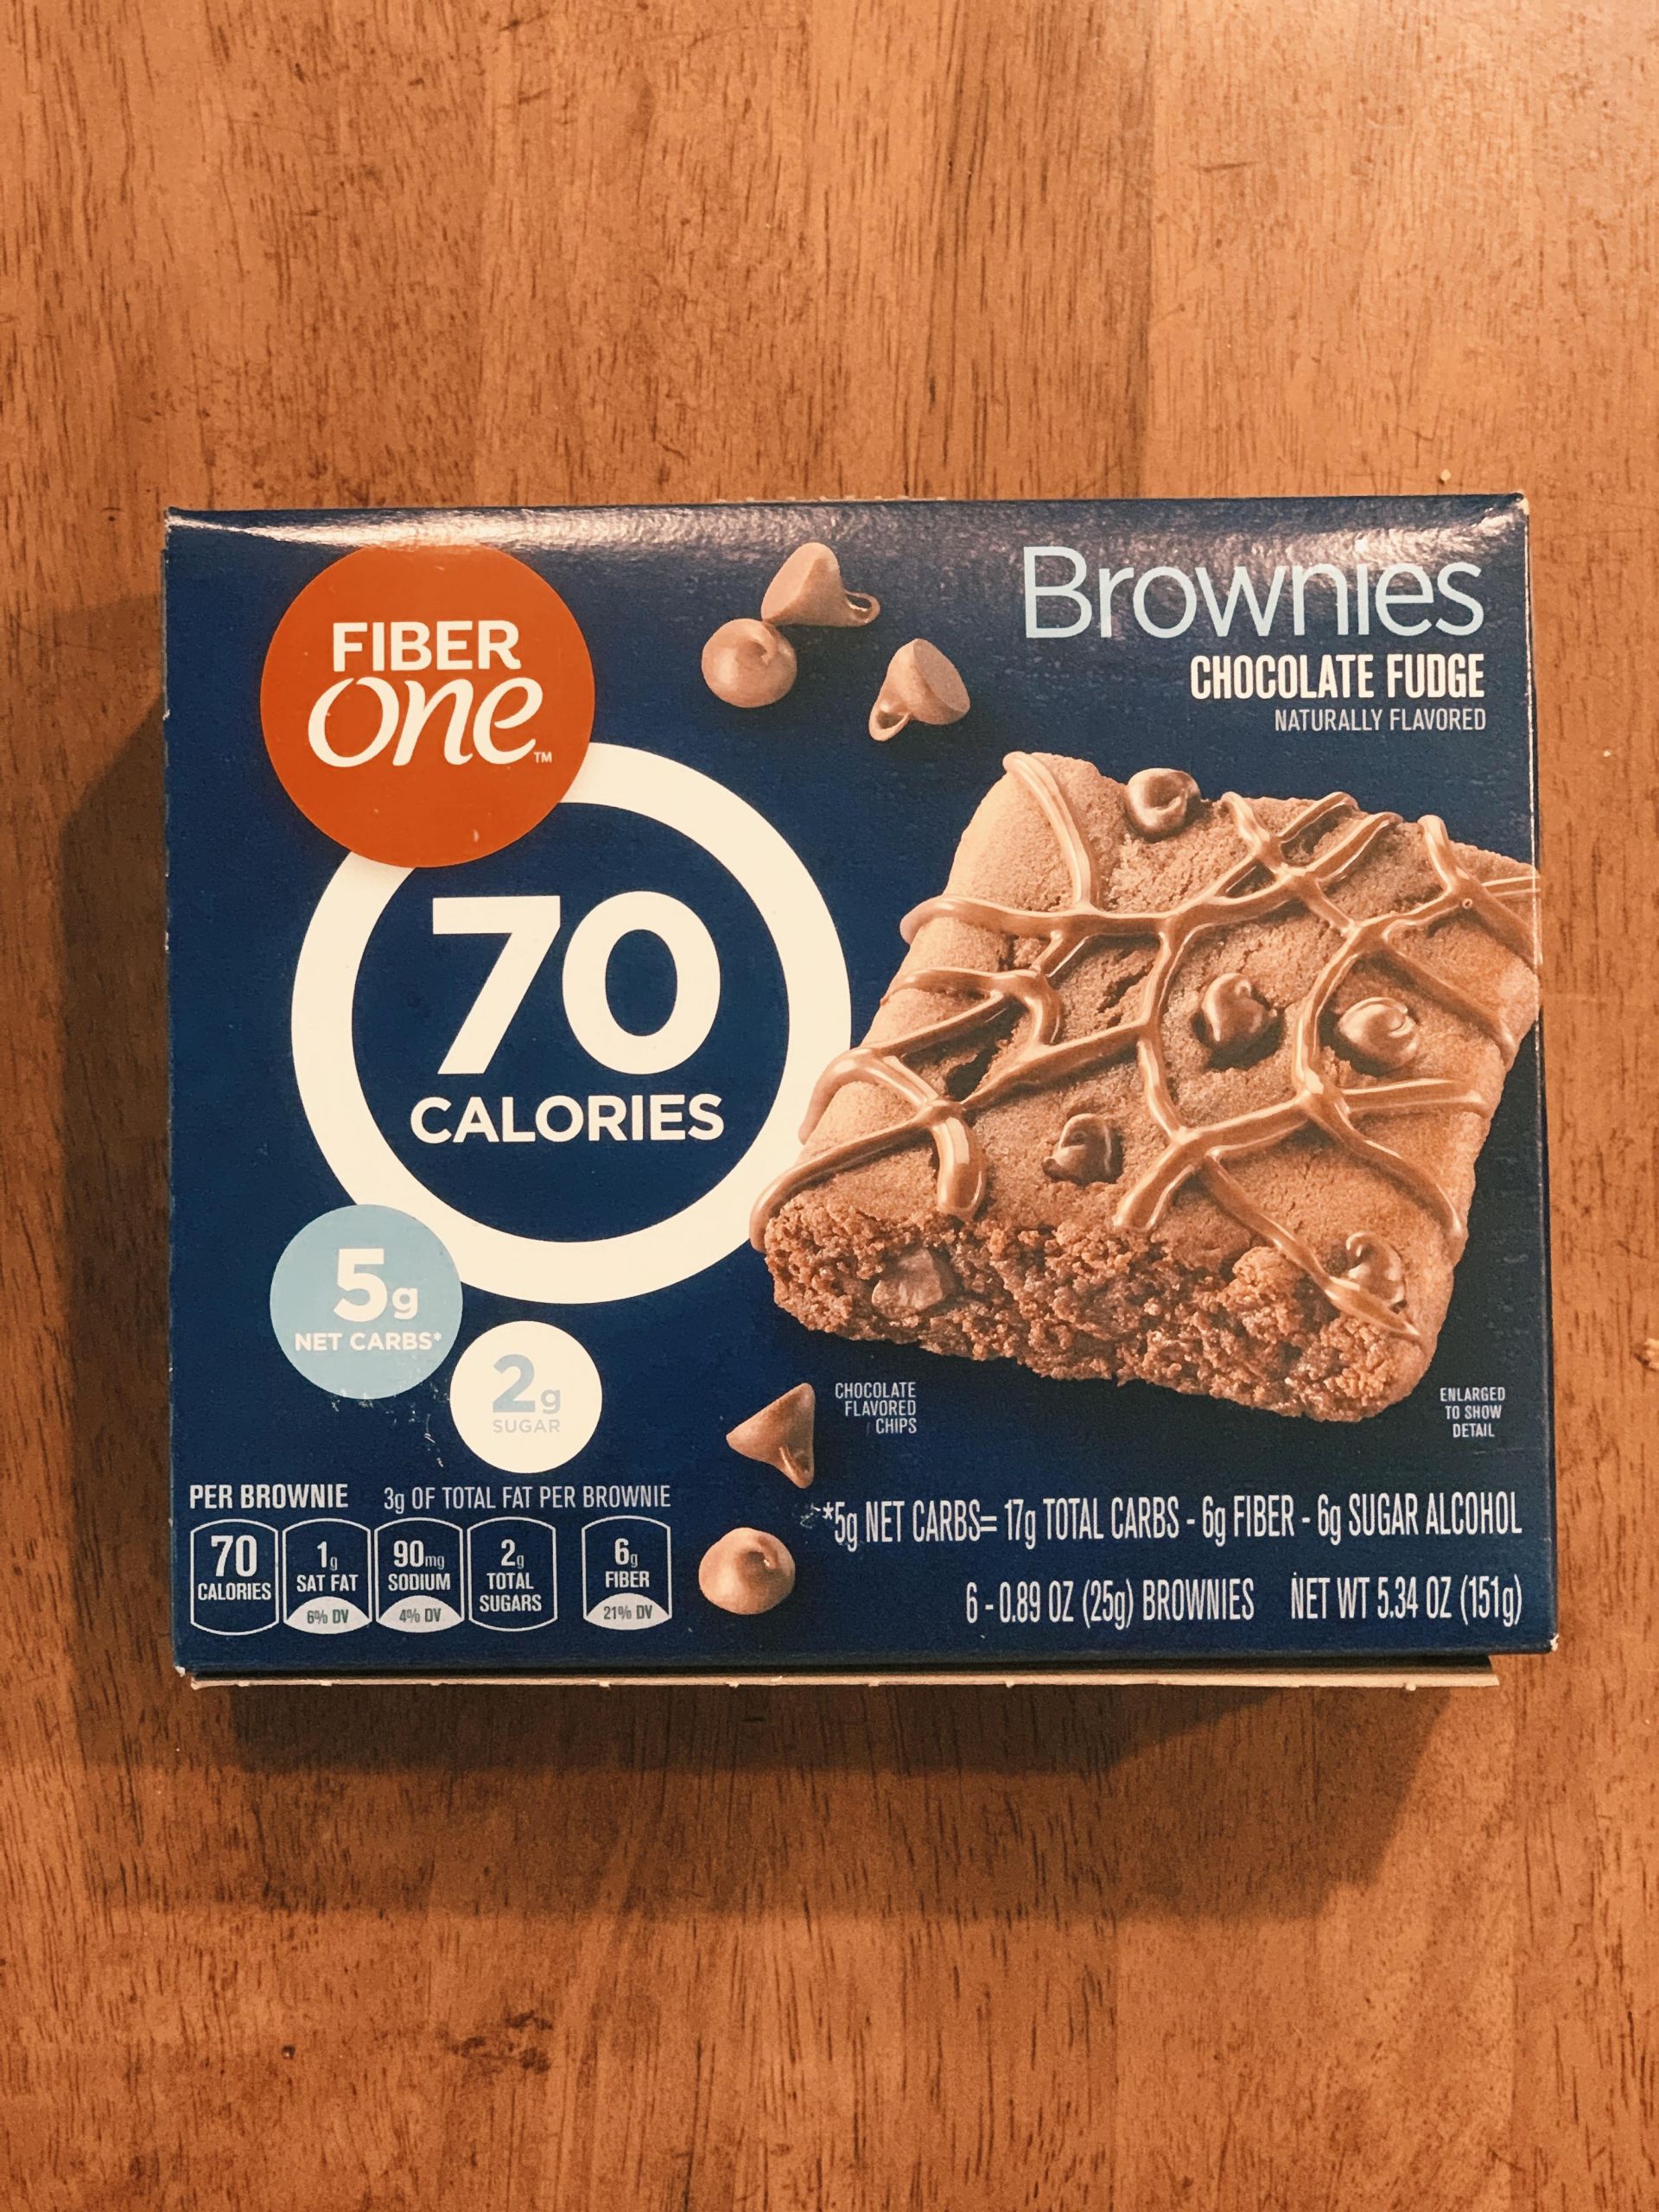 Fiber One Brownies
 Our beloved Fiber e brownies now e in 70 calorie